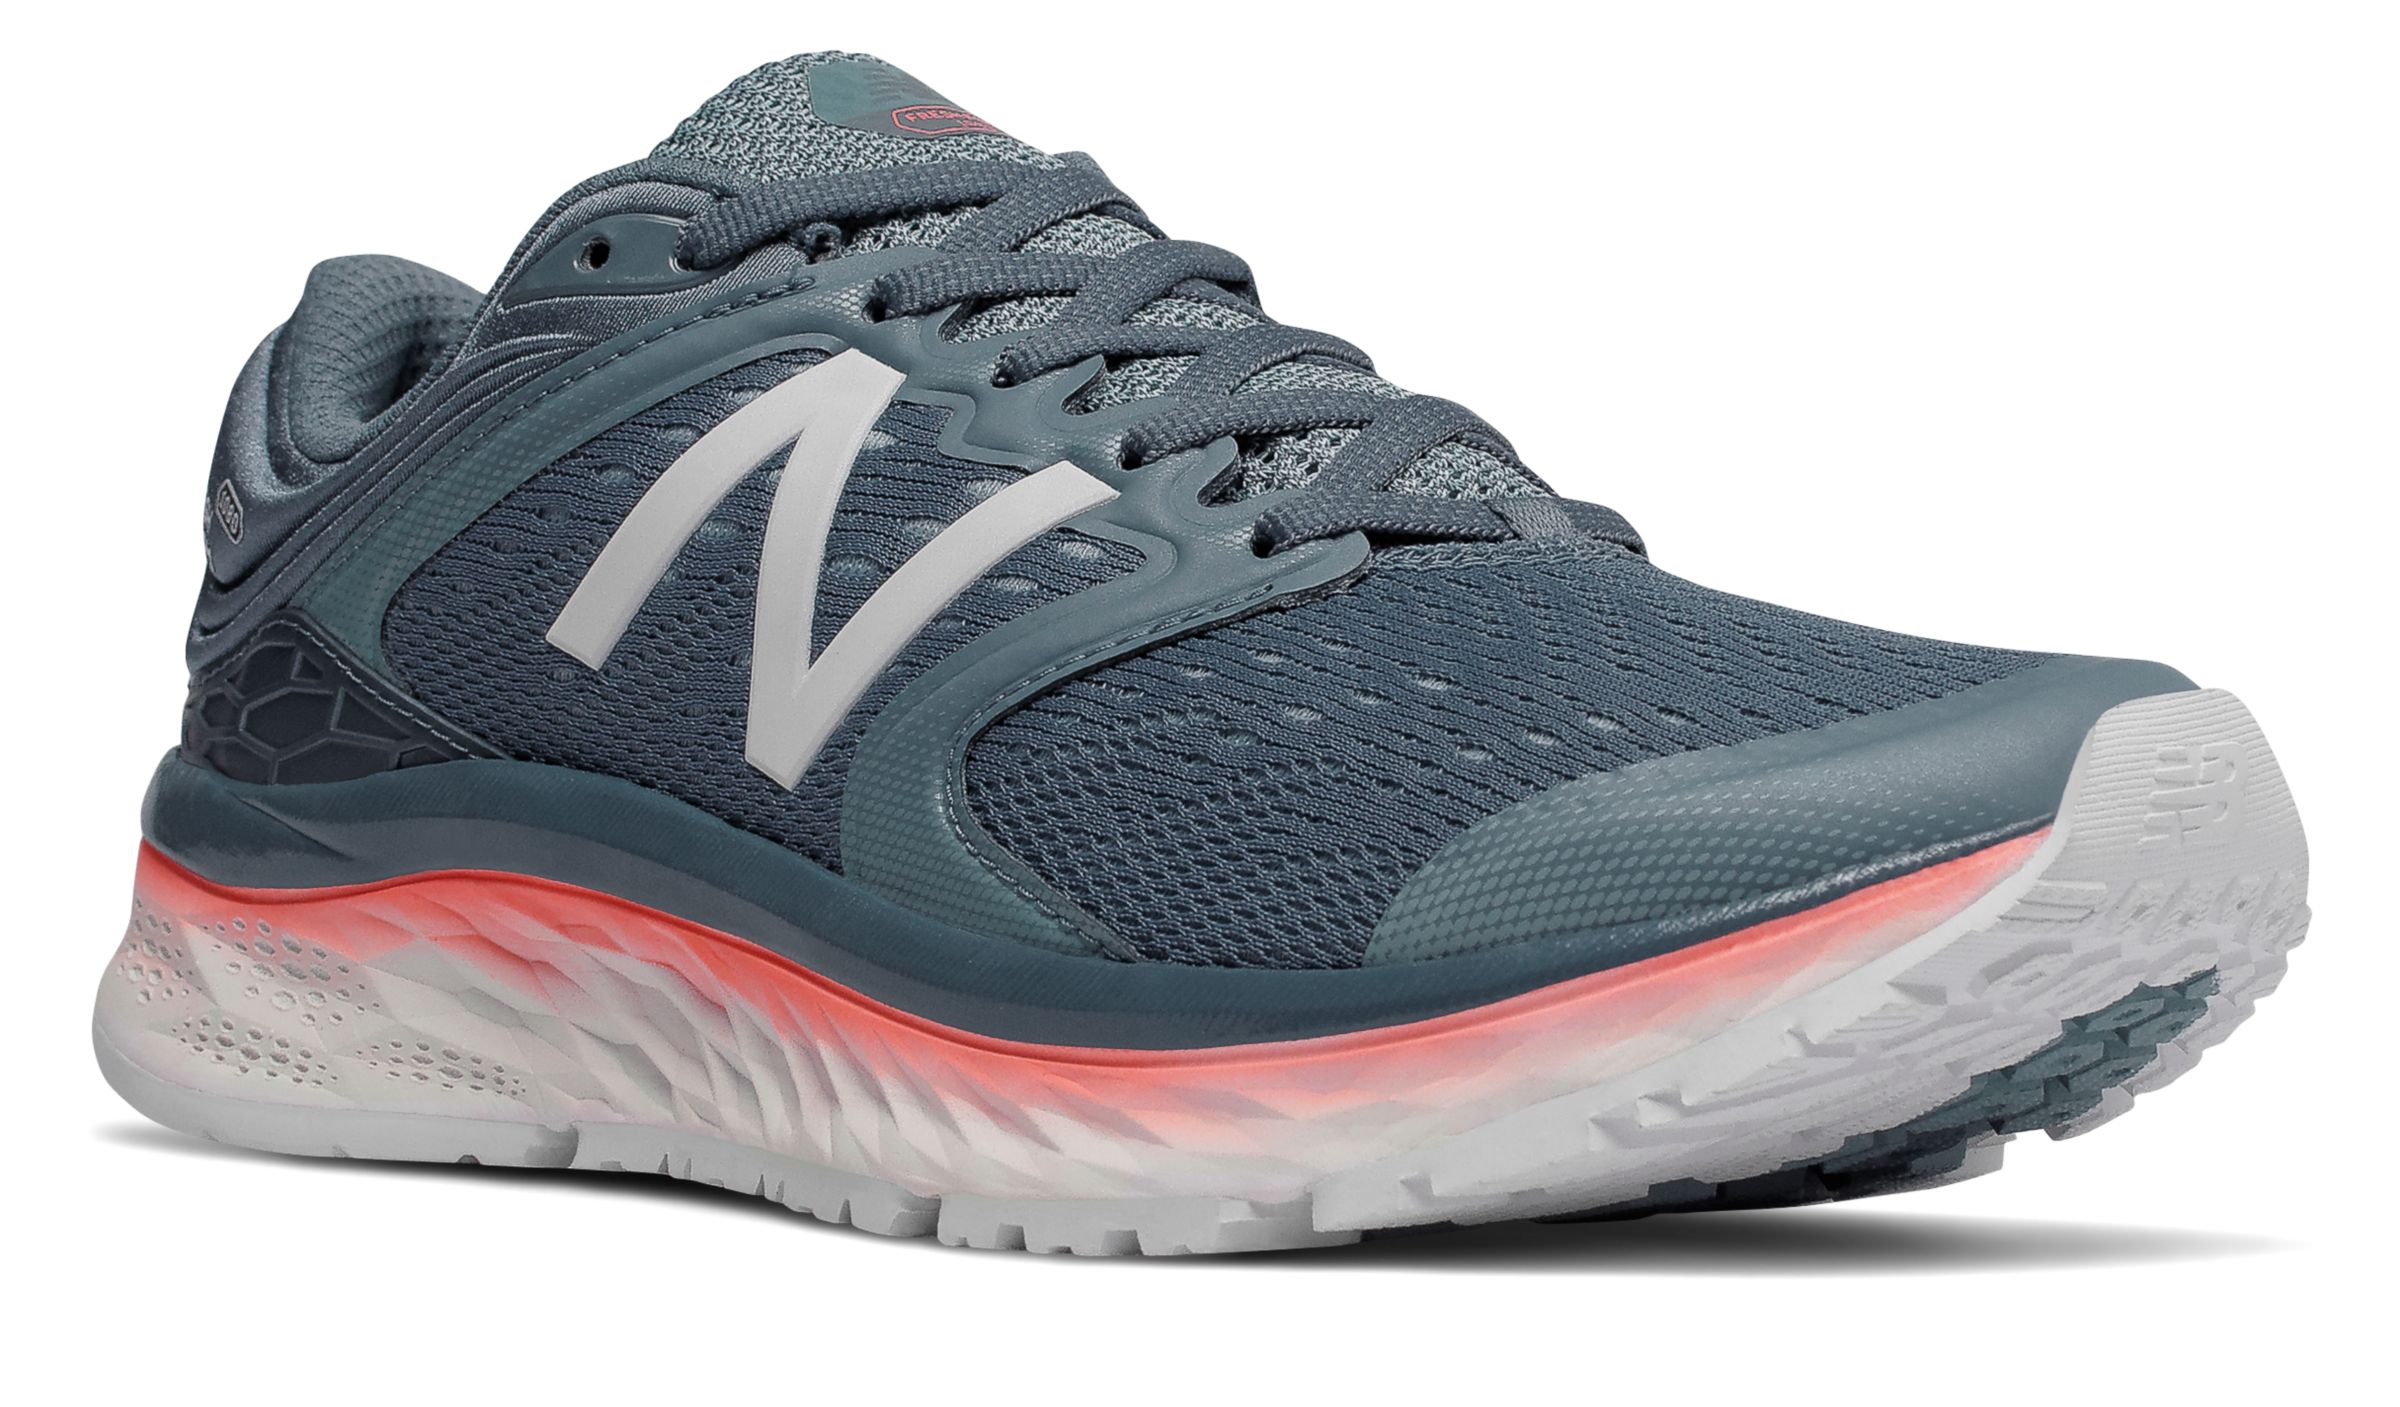 New Balance W1080-V8 on Sale - Discounts Up to 53% Off on W1080PD8 at Joe's  New Balance Outlet